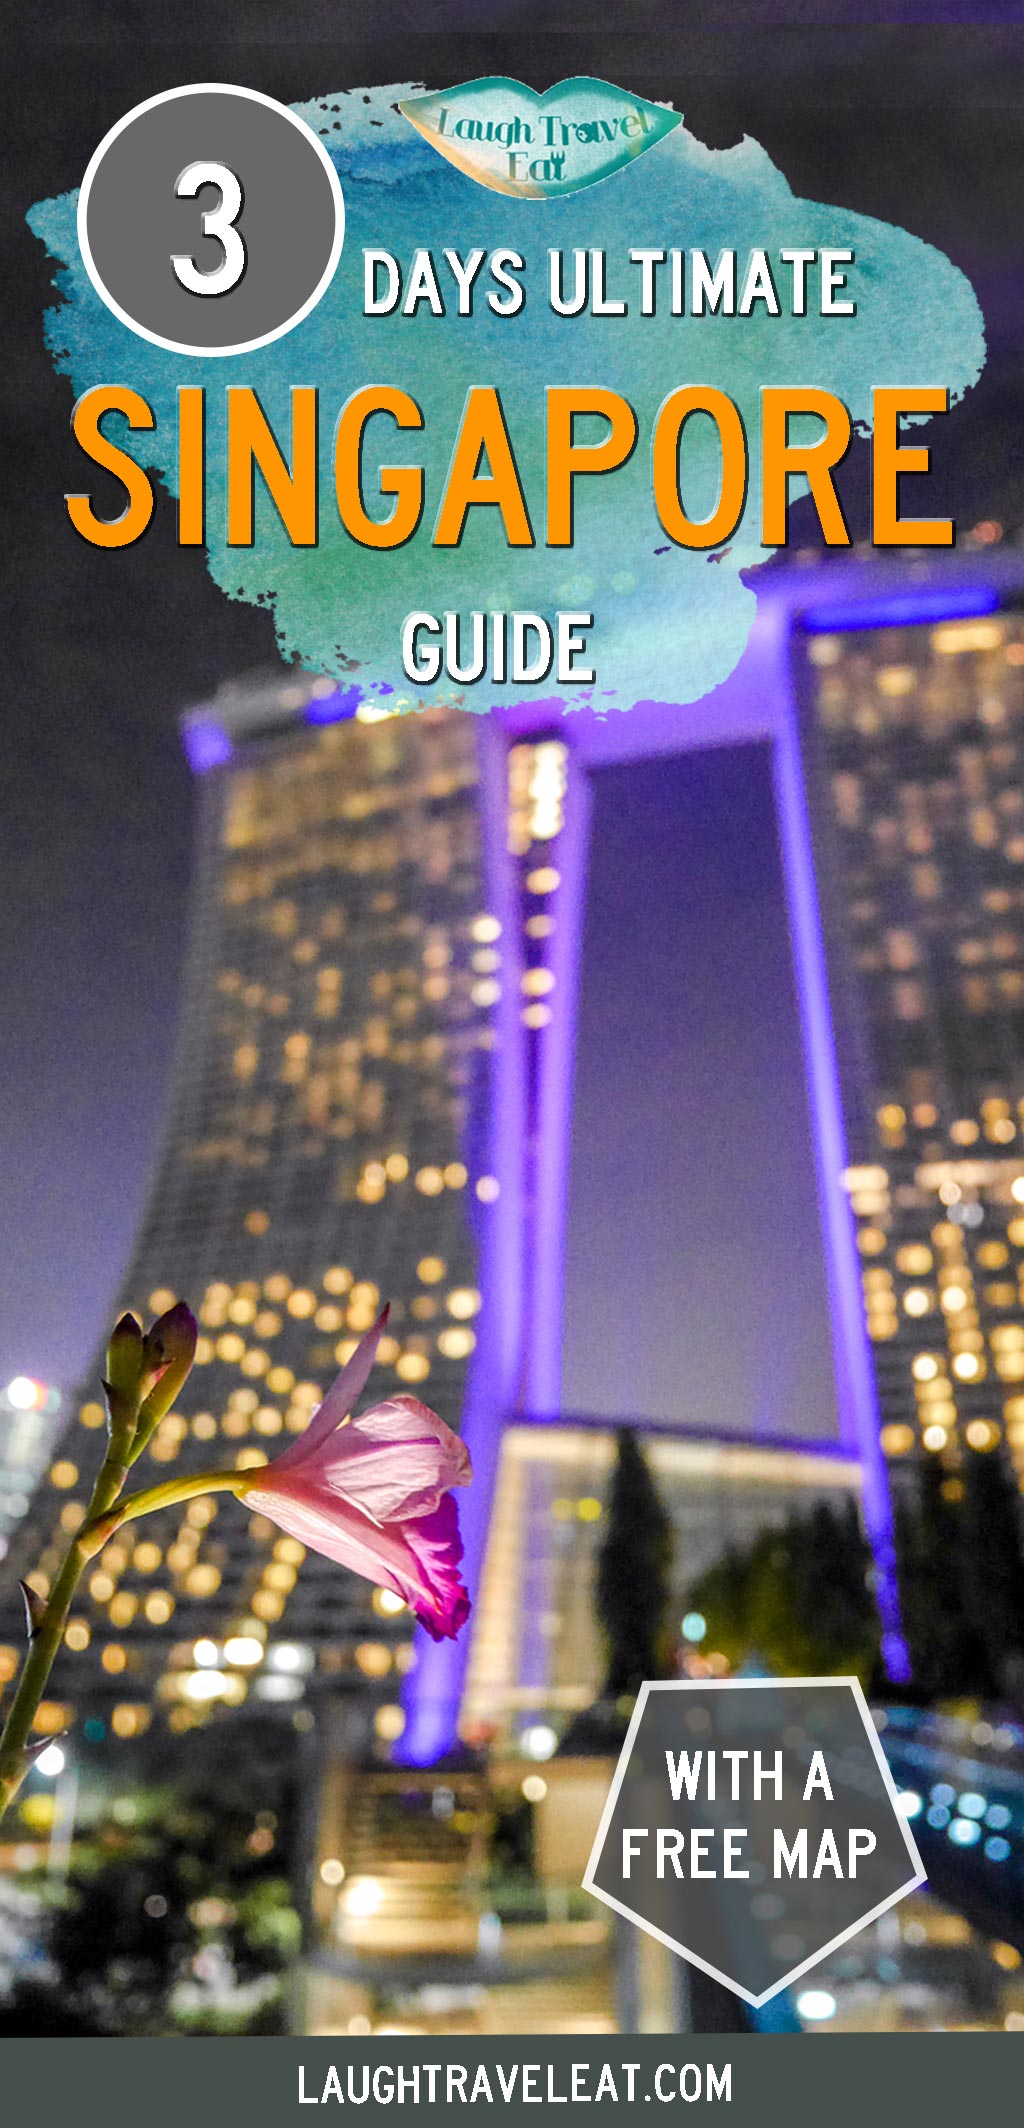 Singapore is a vibrant modern city known for its mix of cultures. Here's what to do, eat, see in Singapore in 3 days: